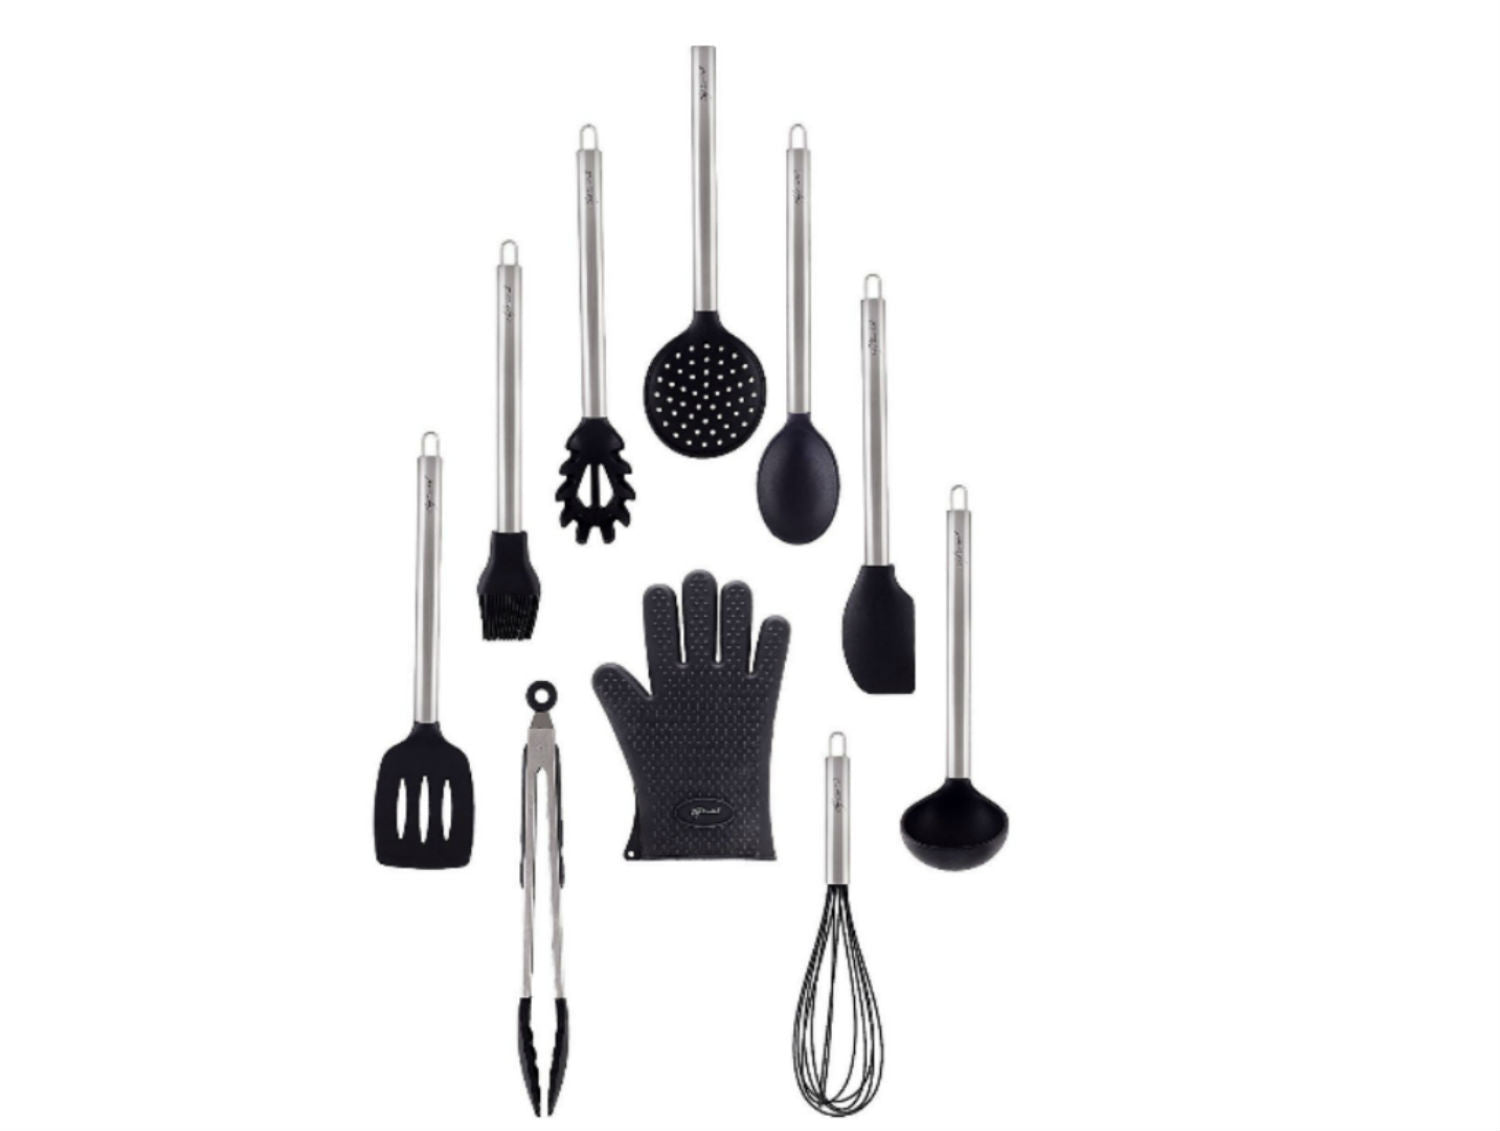 10 Piece Silicone Cooking Utensils Set with Stainless Steel handles – Chef  Essential